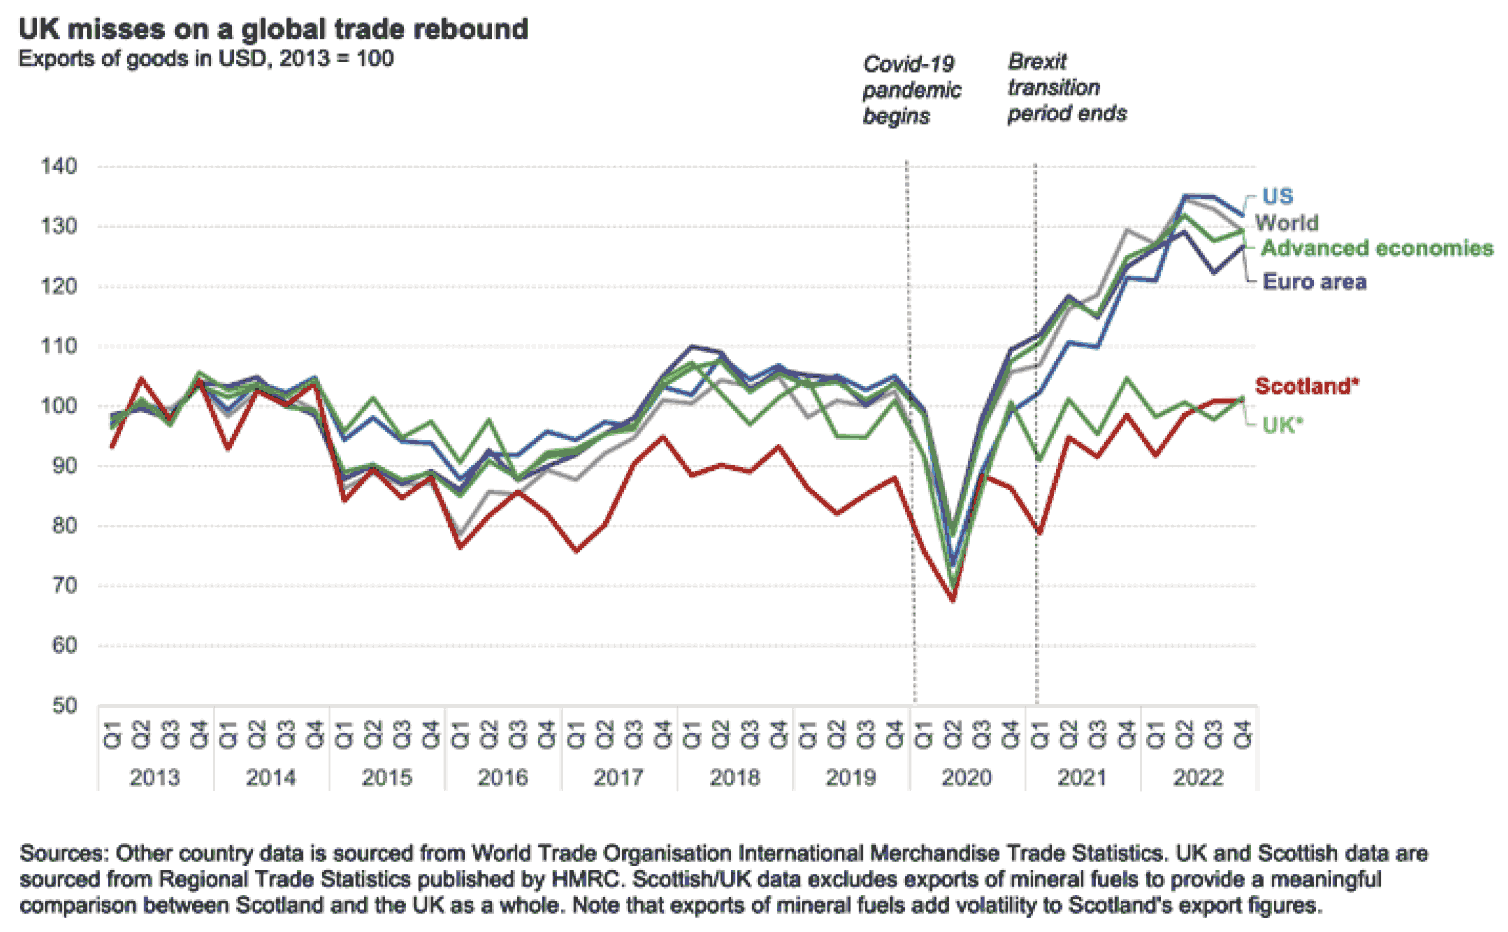 Figure 1 shows Scotland’s recent export performance over time compared to the rest of UK and other economies